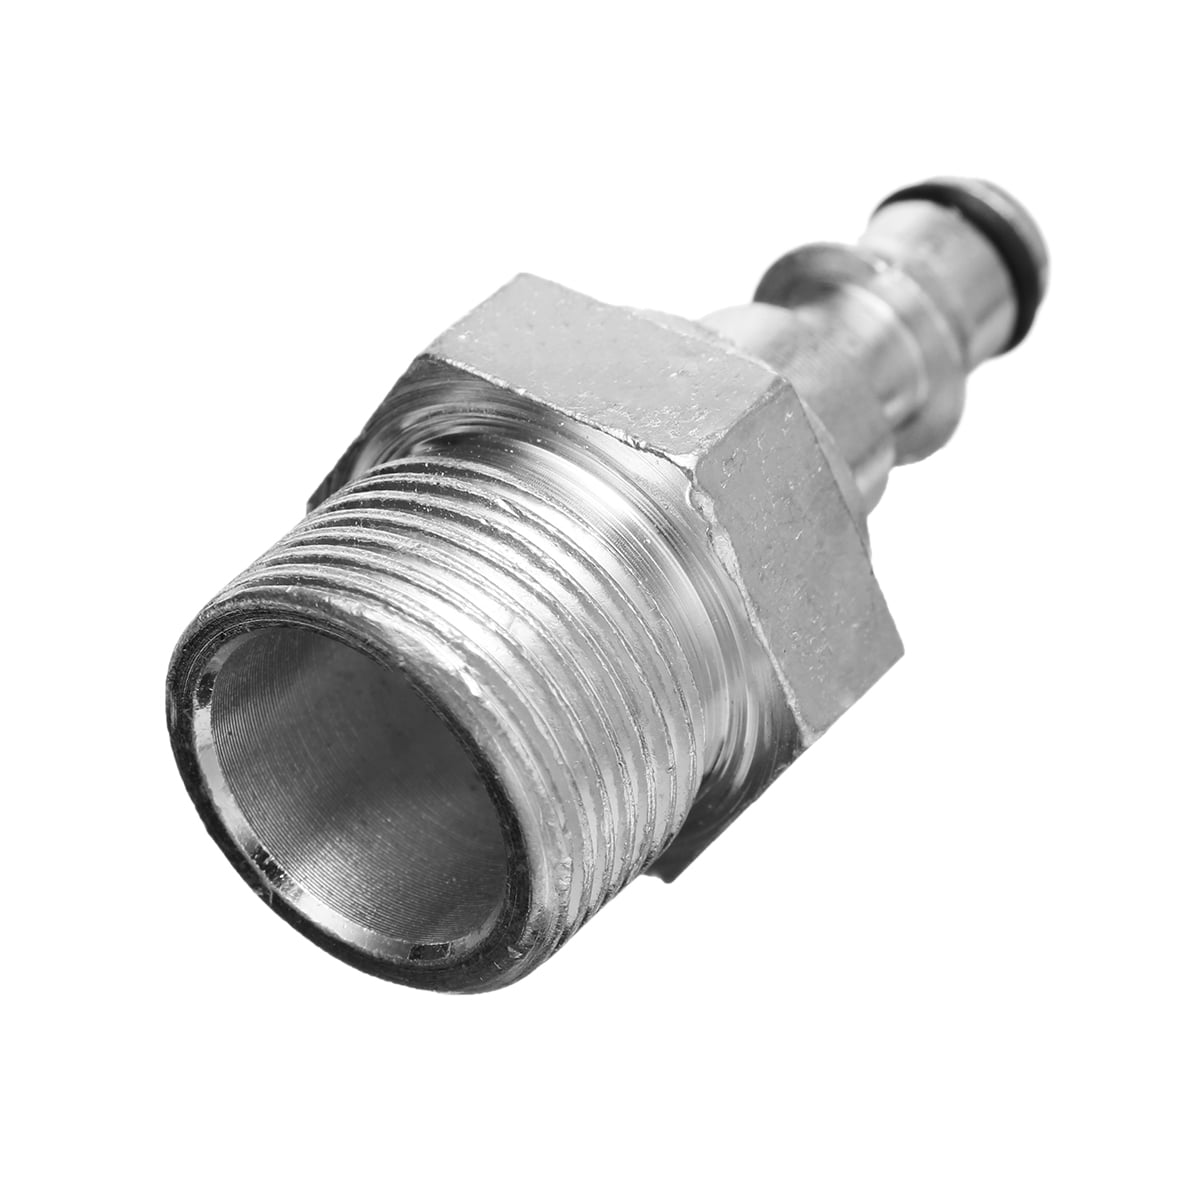 Pressure Washer Internal Nozzle Lance Valve for LAVOR VAX Adapter Car Auto Tool